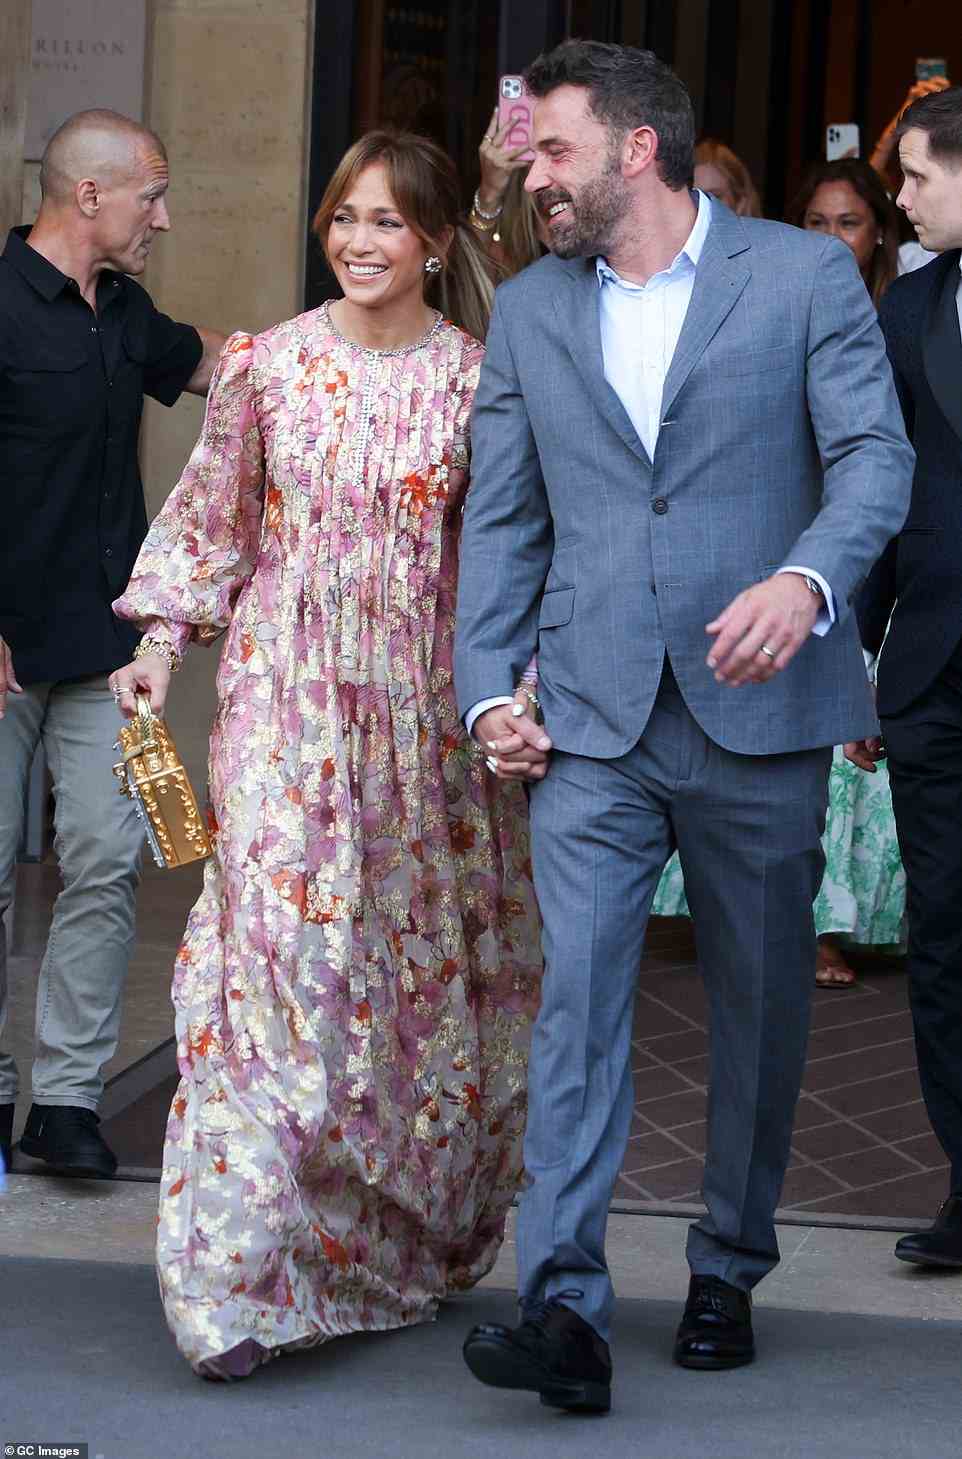 Jennifer Lopez and Ben Affleck jetted off to the French city days after they tied the knot during an intimate Las Vegas wedding last weekend, and Lopez has worn a slew of stunning outfits throughout the trip - which totaled more than $170,000